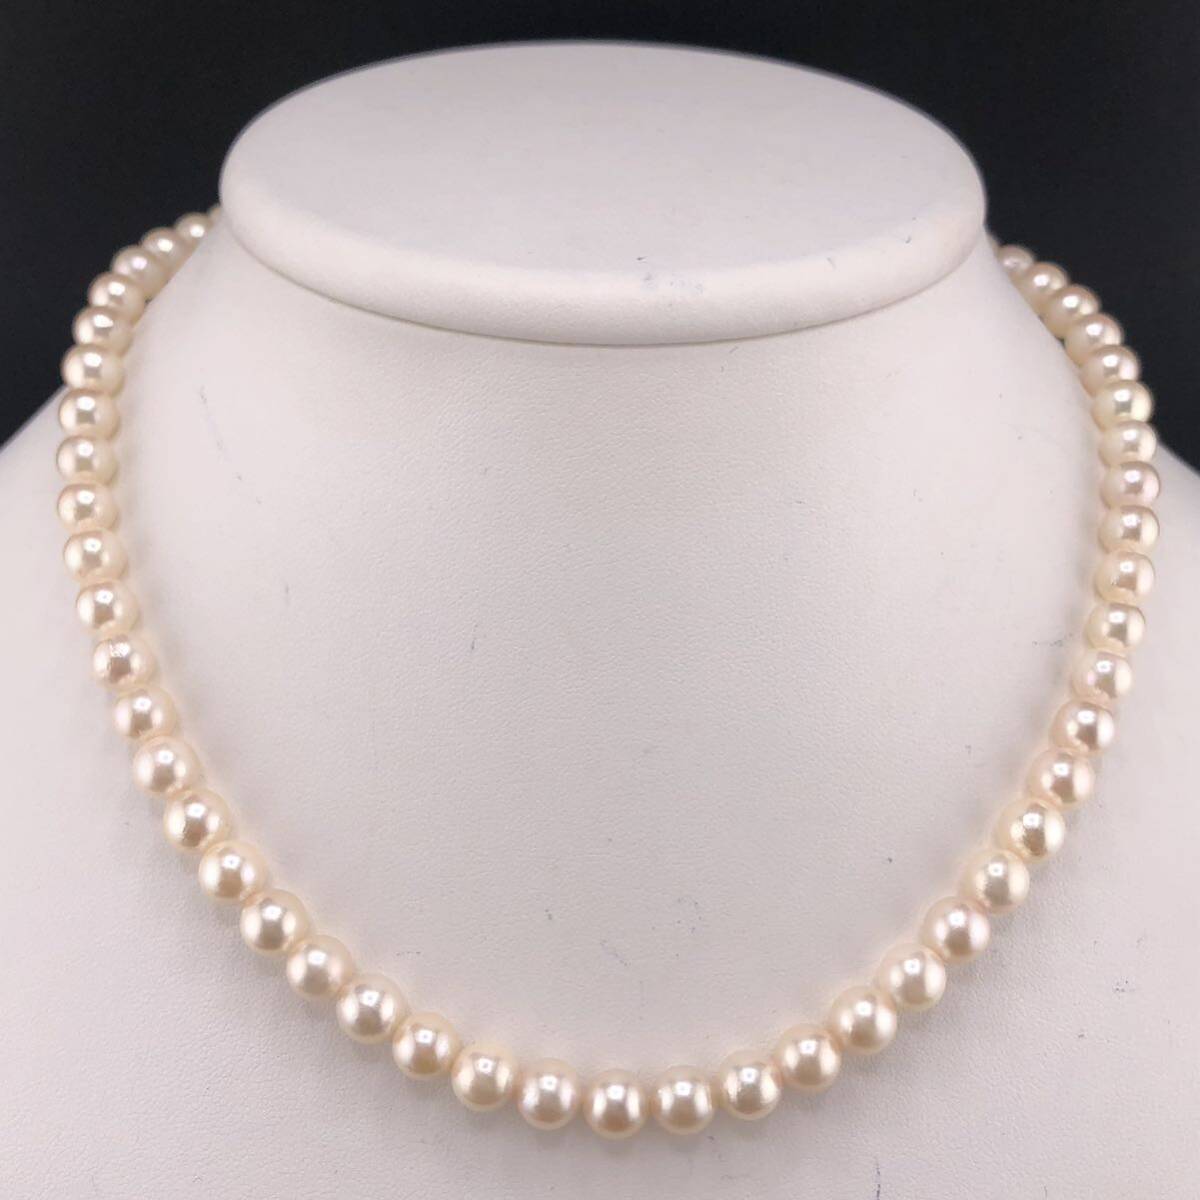 E04-1821 アコヤパールネックレス 6.5mm 40cm 29.3g ( アコヤ真珠 Pearl necklace SILVER )の画像1